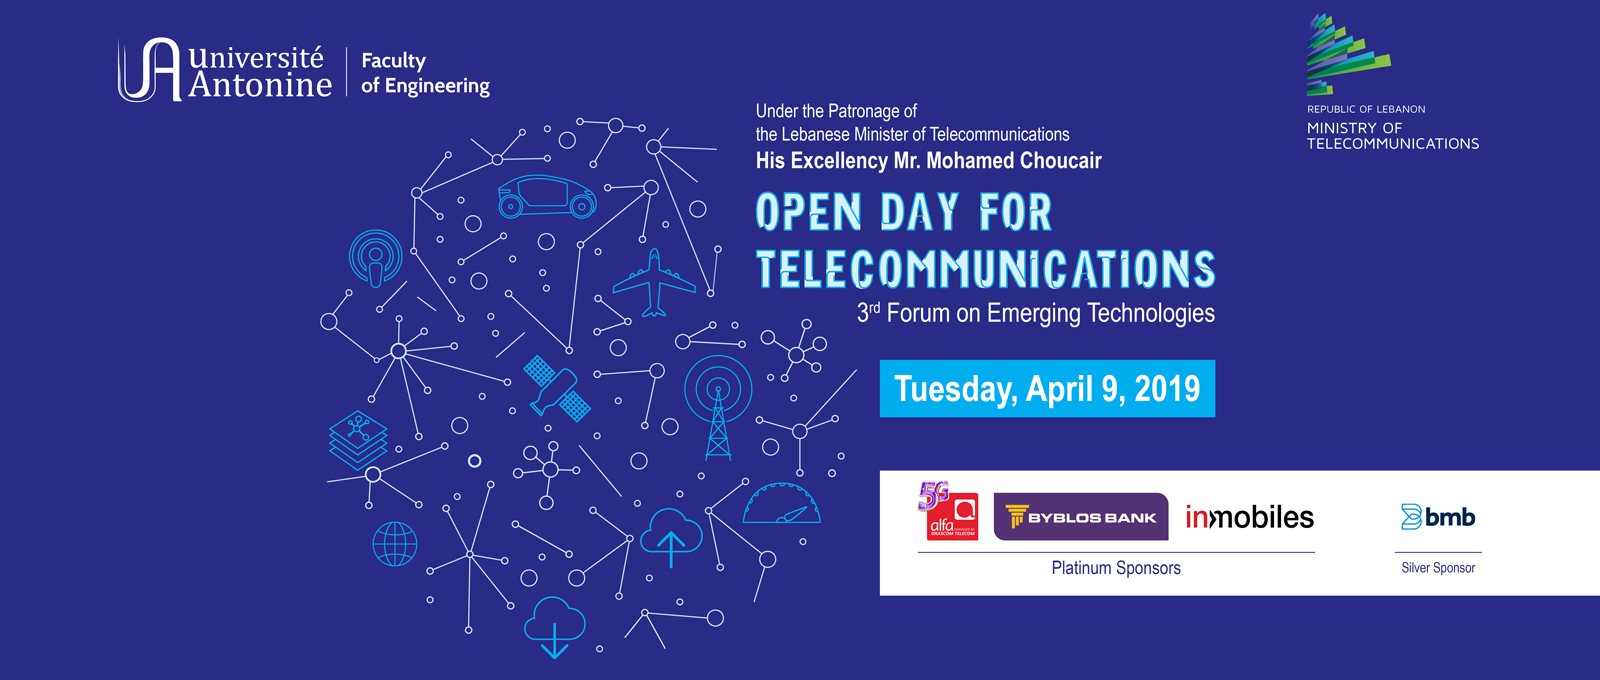 3rd Forum on Emerging Technologies: Open Day for Telecommunication 